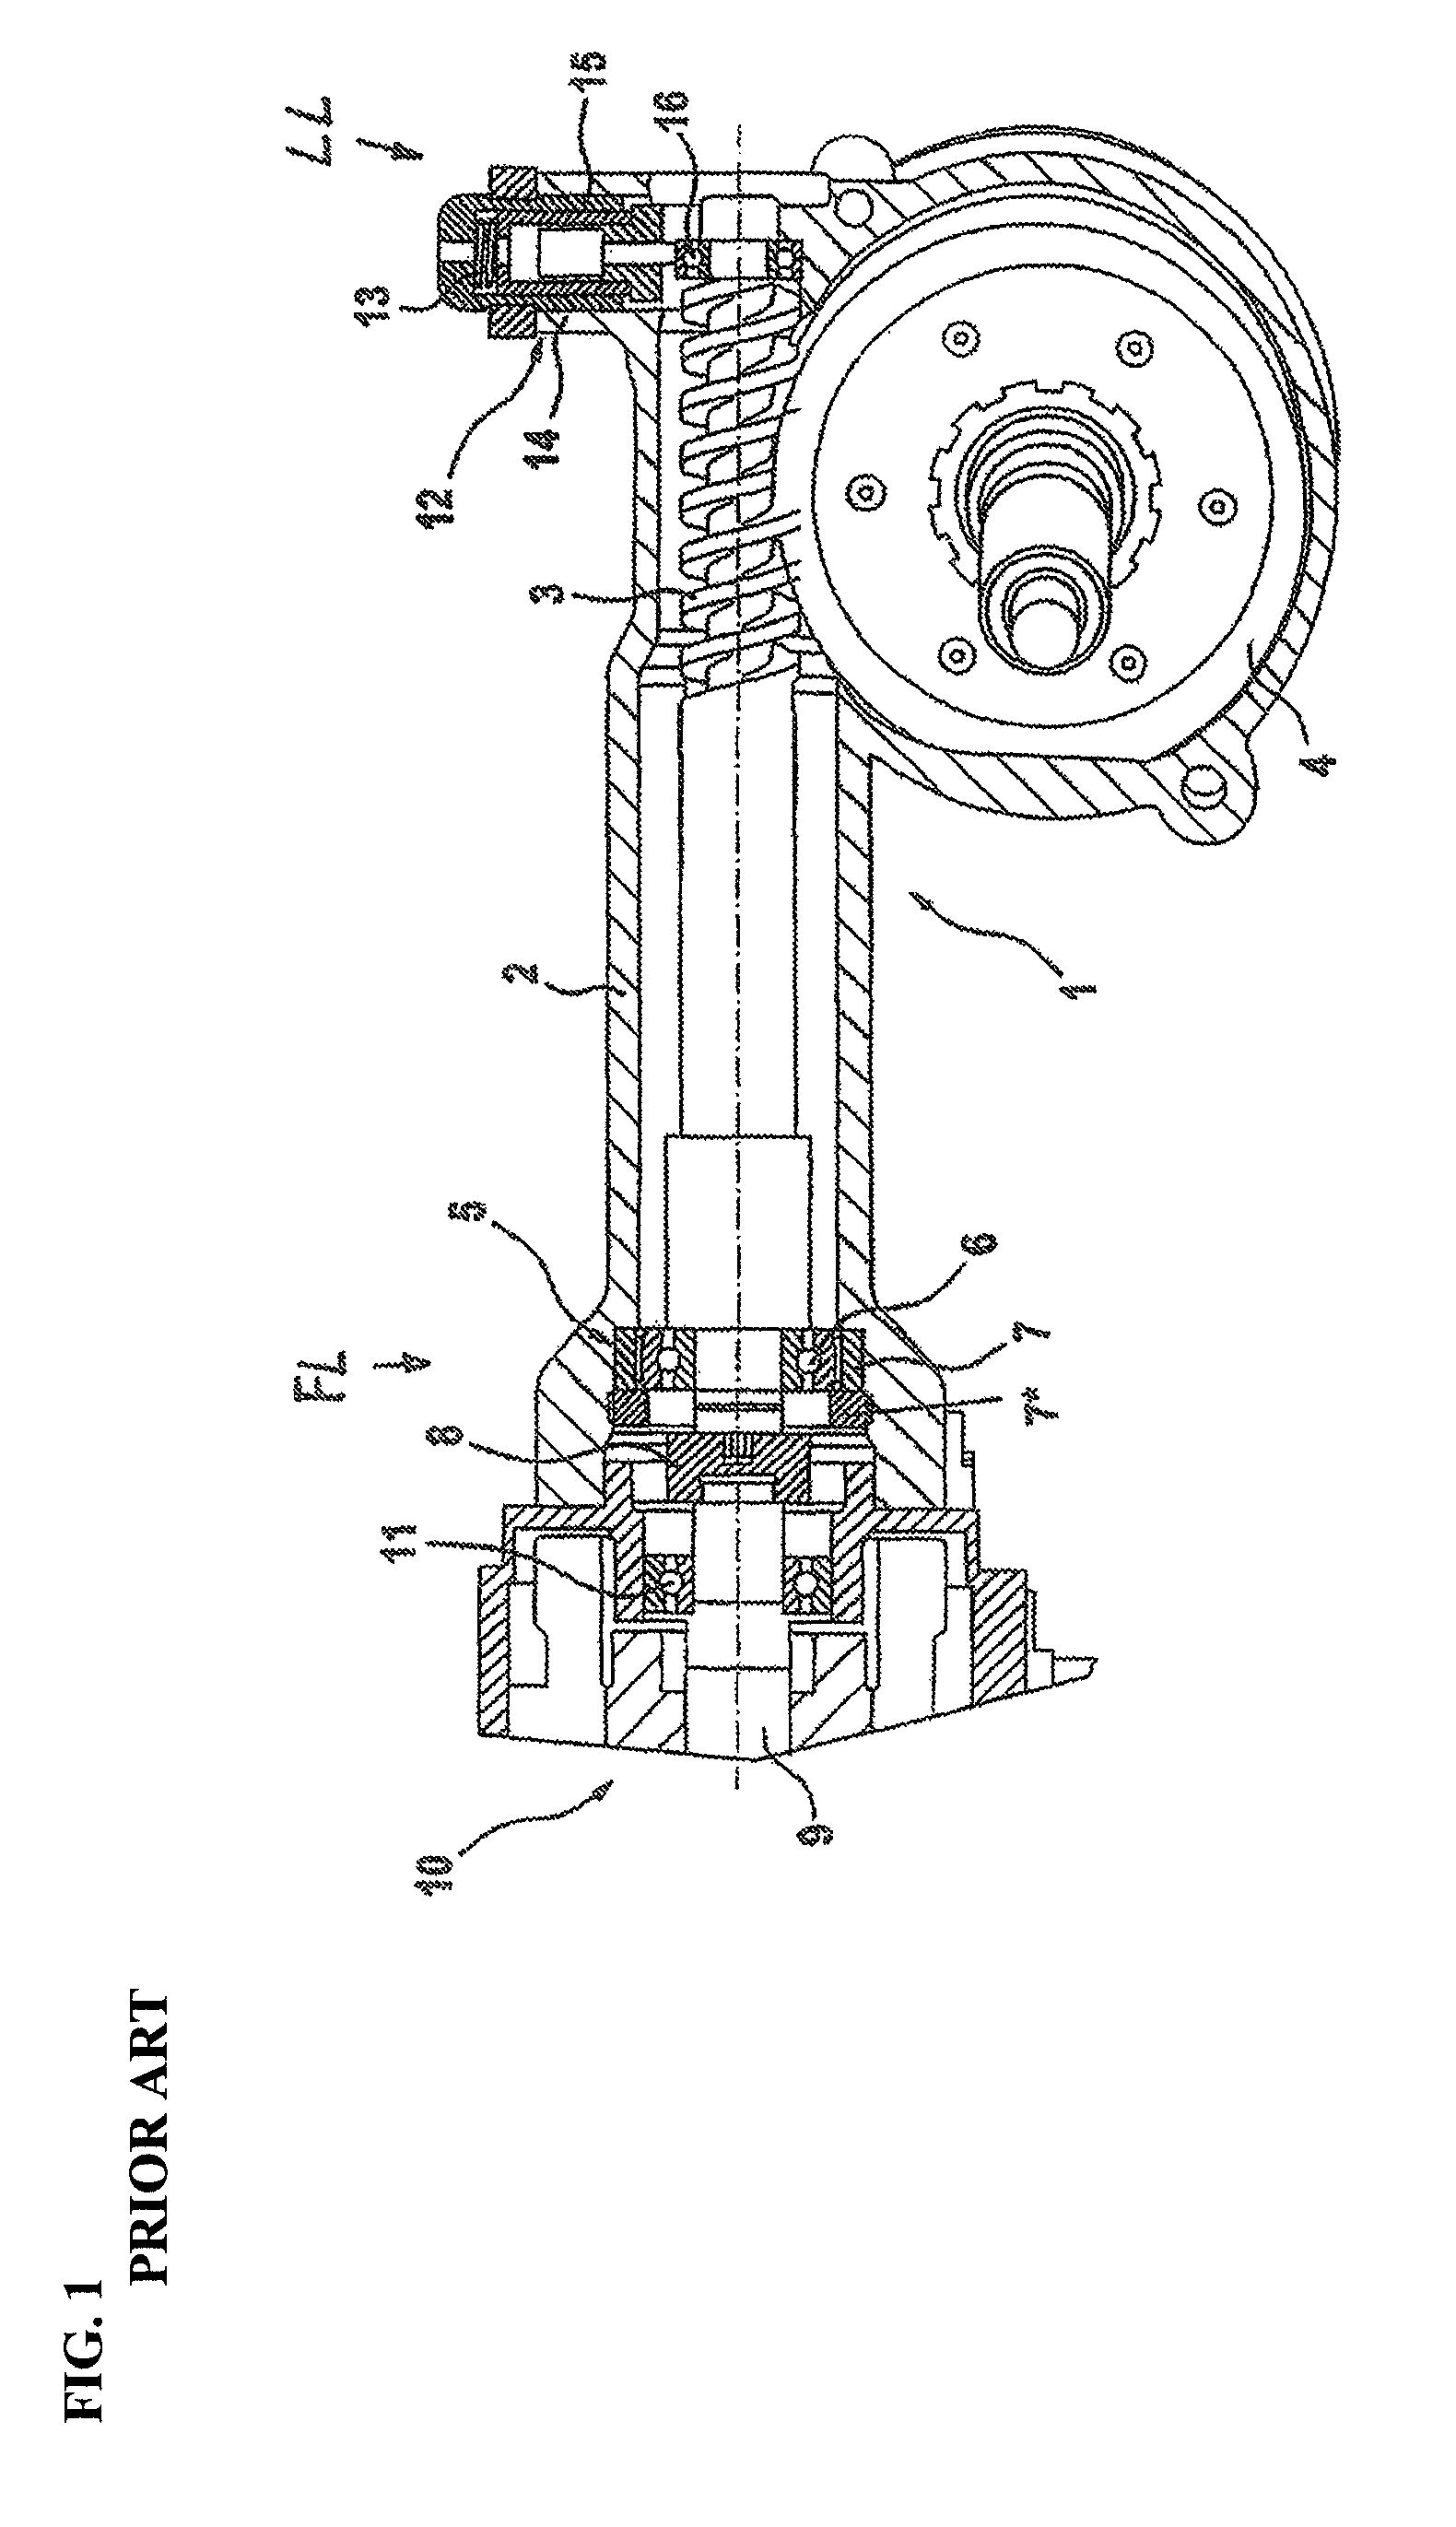 Steering gear having a fixed bearing and a floating bearing for a screw pinion